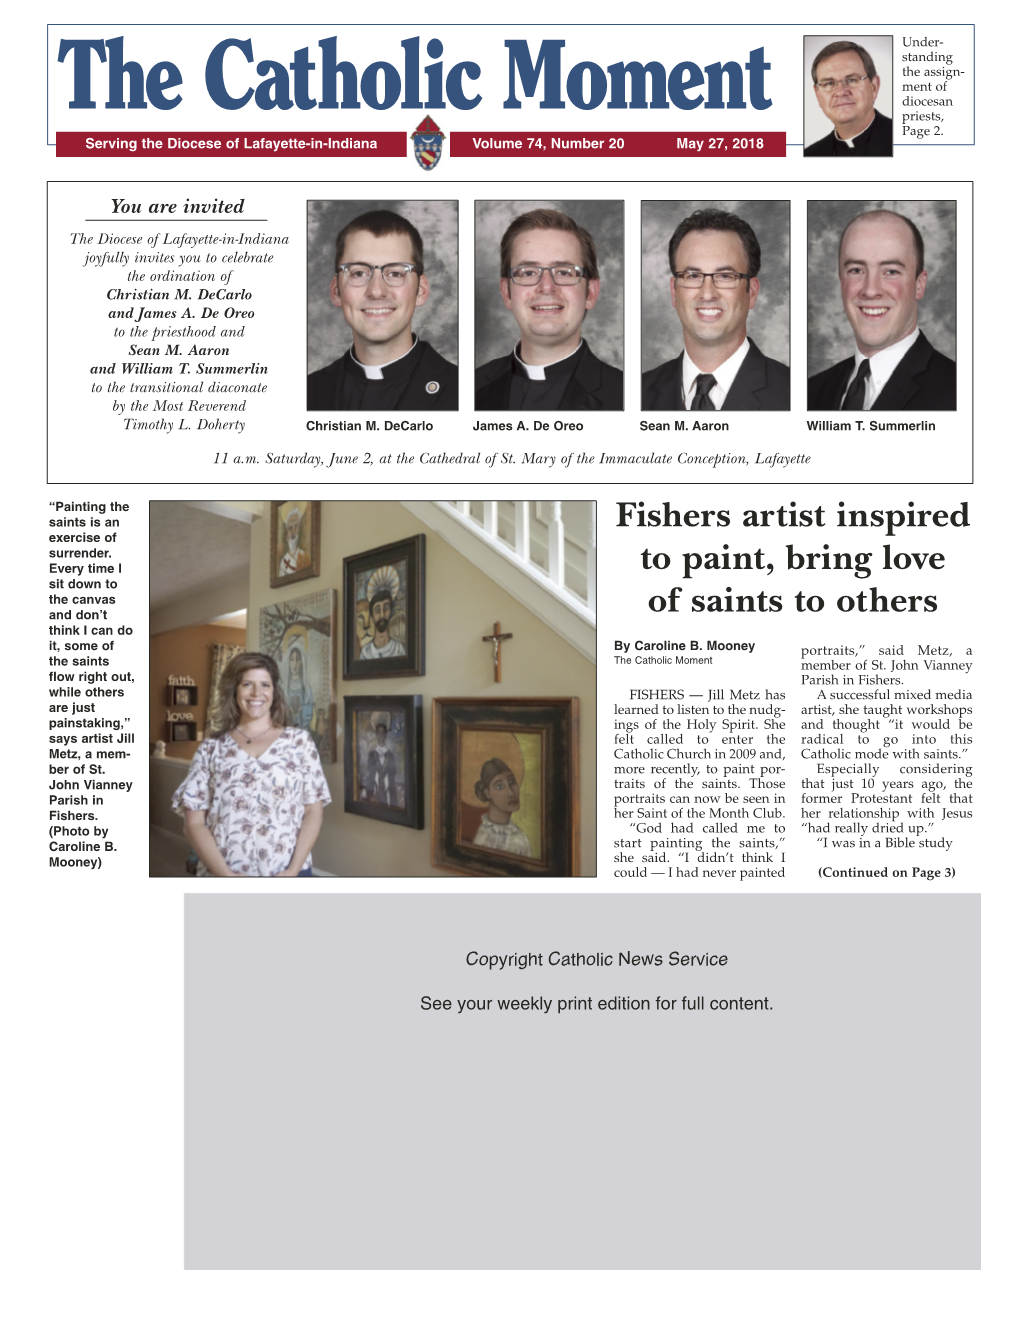 Fishers Artist Inspired to Paint, Bring Love of Saints to Others